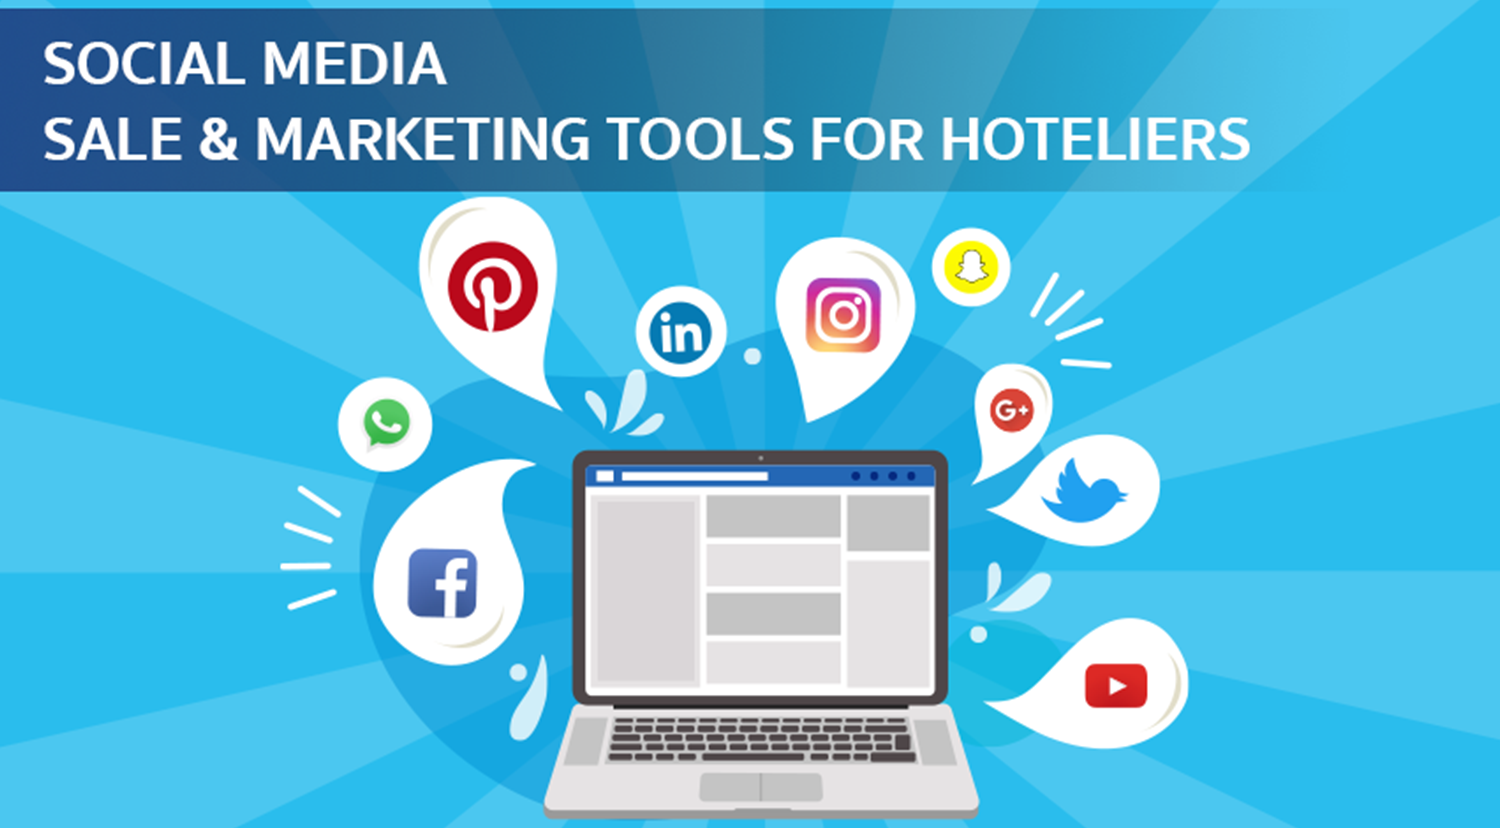 SOCIAL MEDIA – SALE & MARKETING TOOLS FOR HOTELIERS